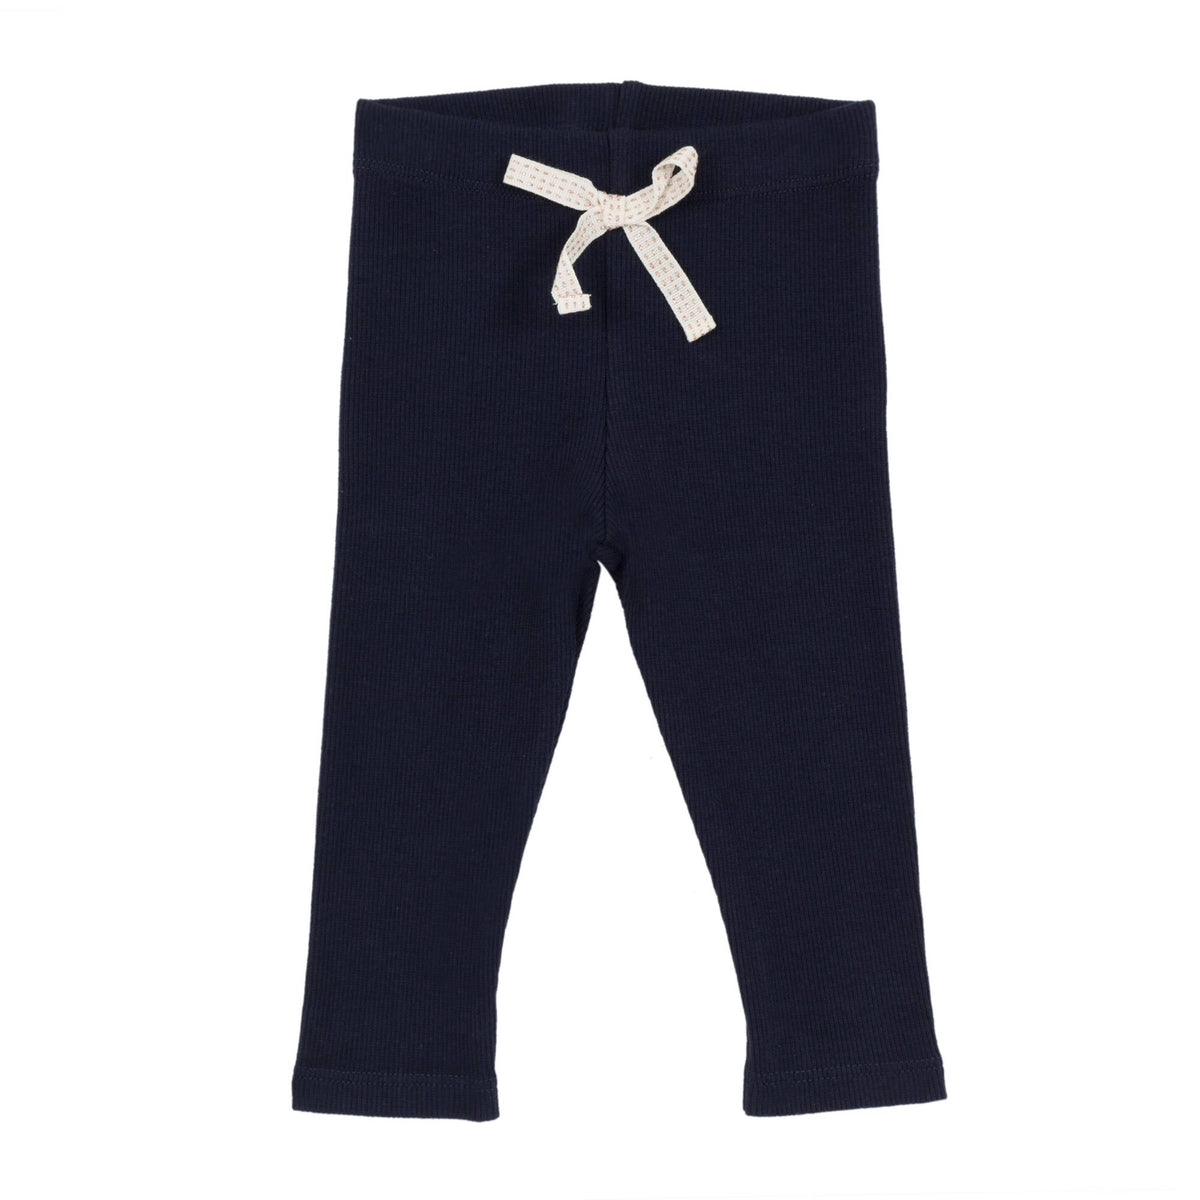 Jean Bourgert navy blue cotton leggings is punctuated by fine ribs and large ivory ribbon at the waist.